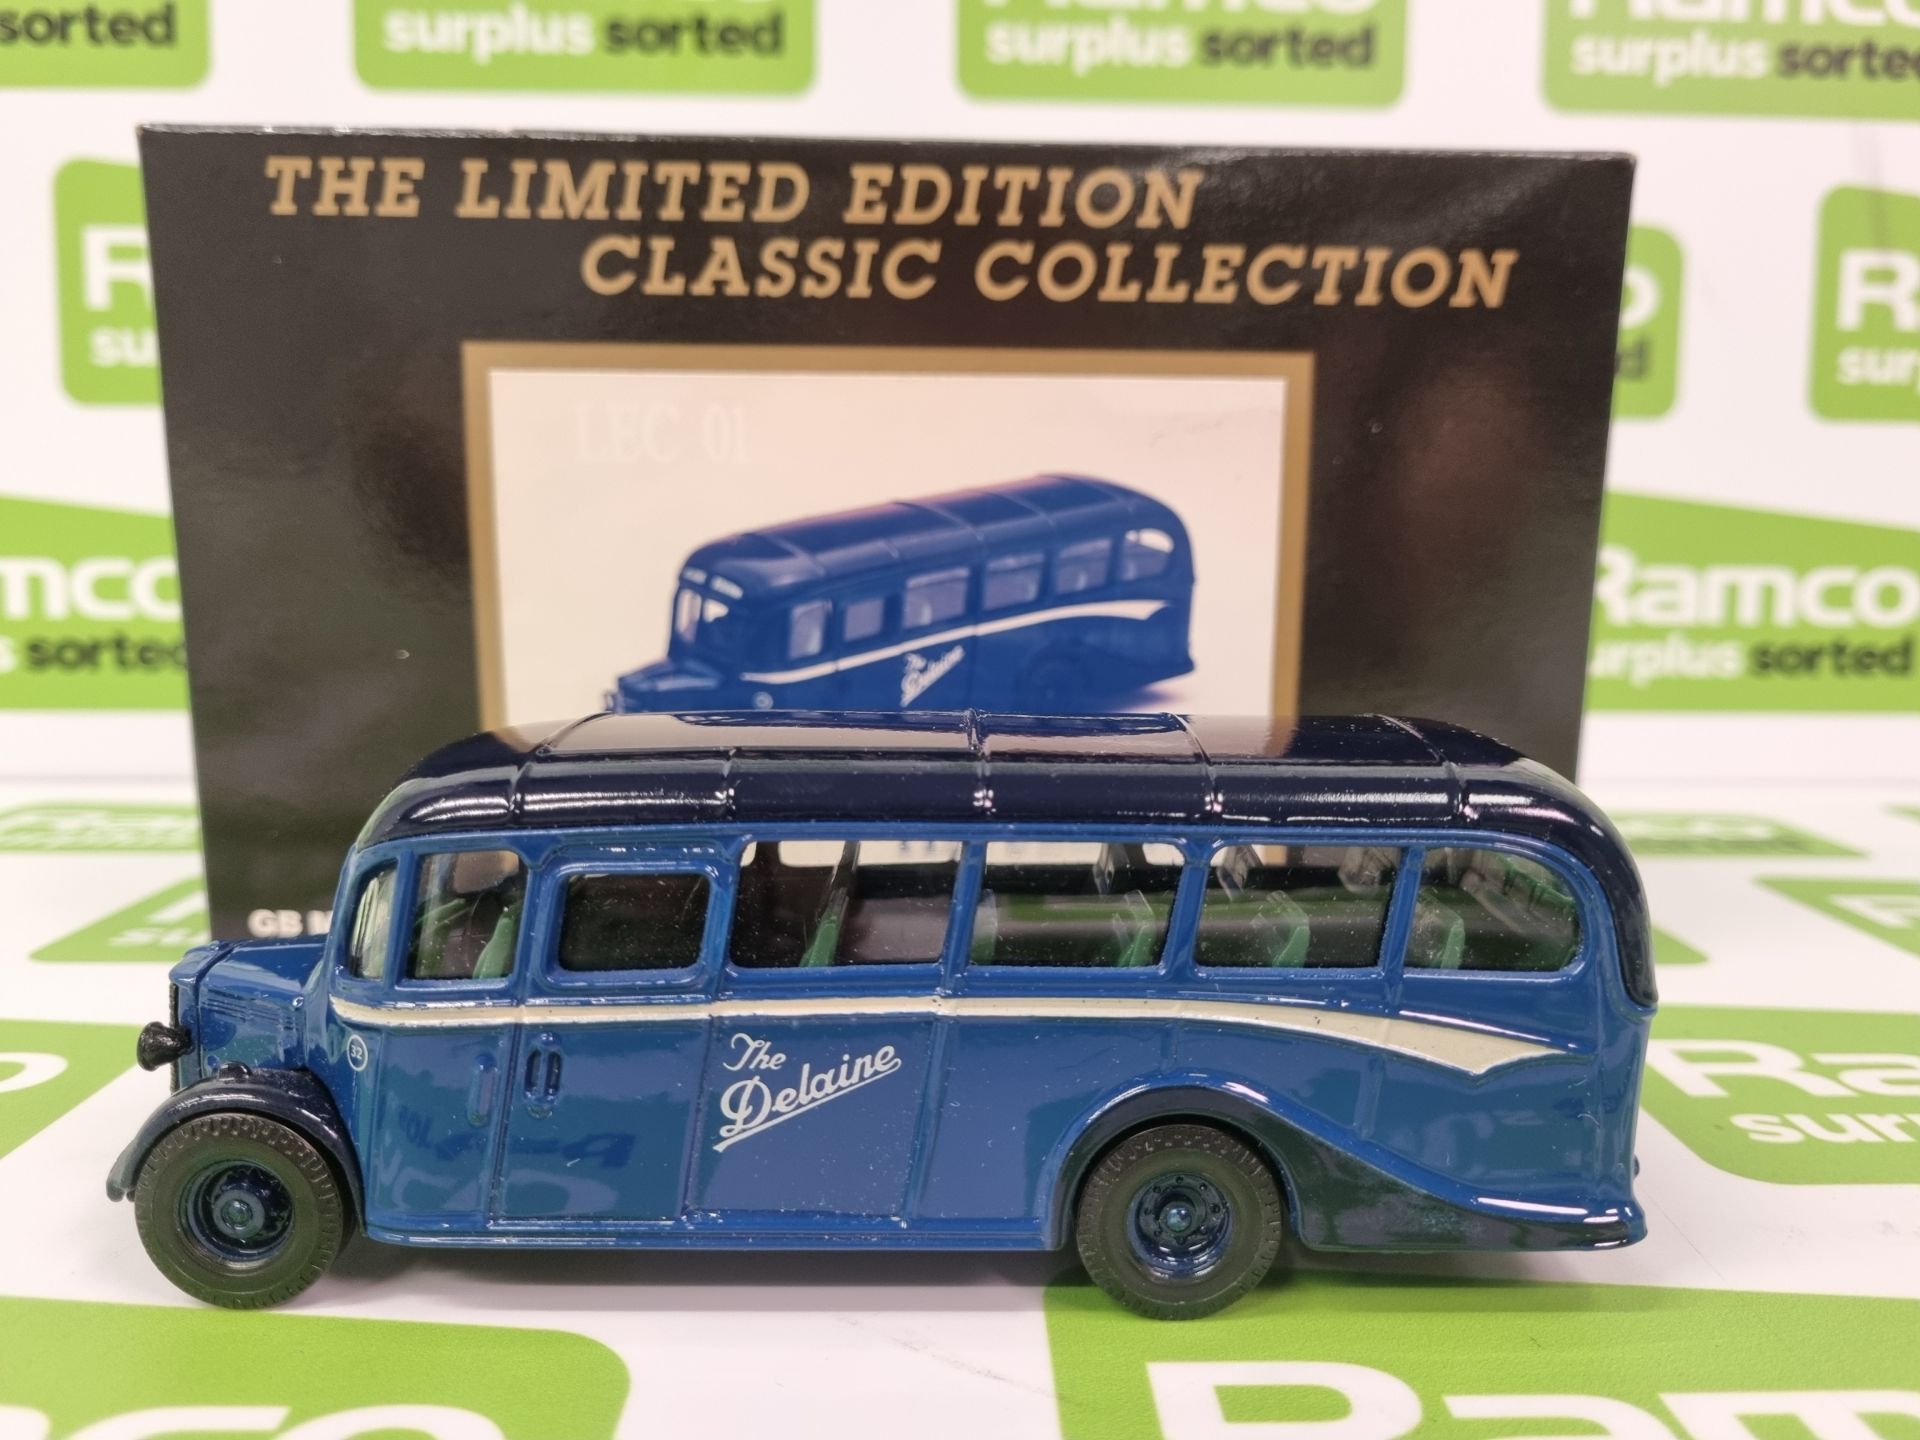 GB Models LEC 01 - Certificate No. 293 - Bedford OB Coach - 'The Delaine' - 1:43 to 1:50 scale model